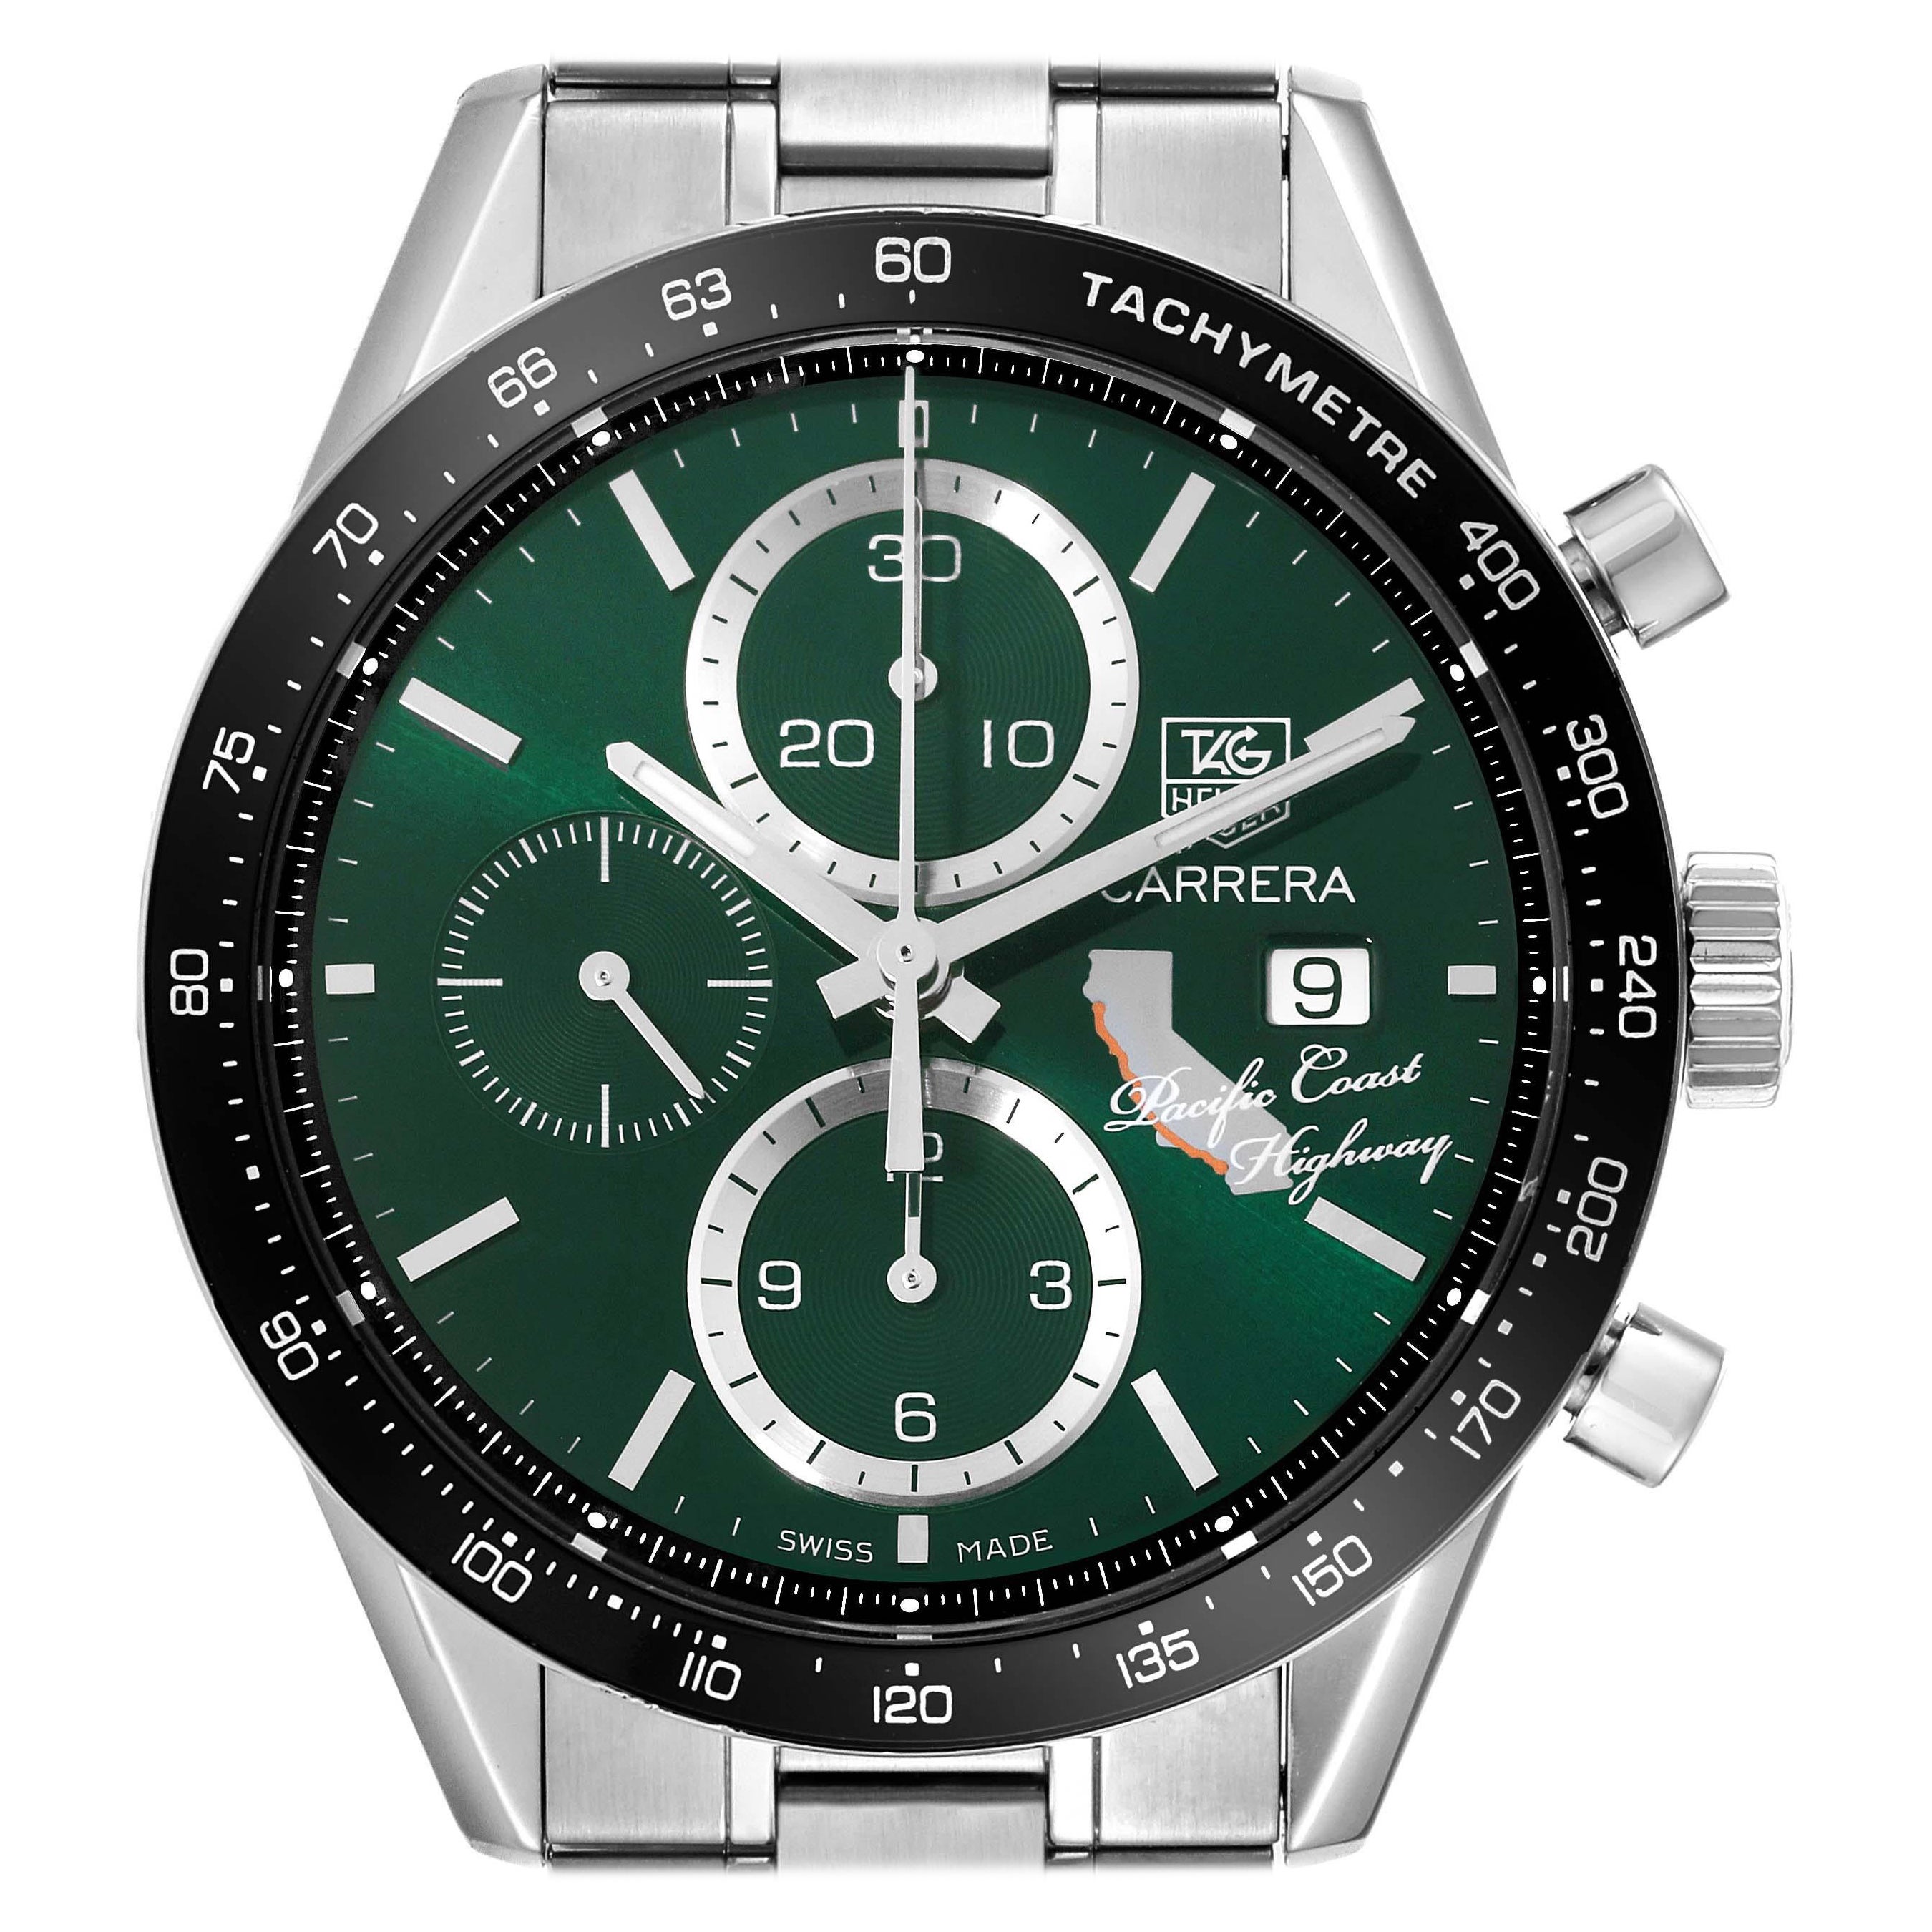 Tag Heuer Carrera Pacific Coast Highway Limited Edition Steel Mens Watch